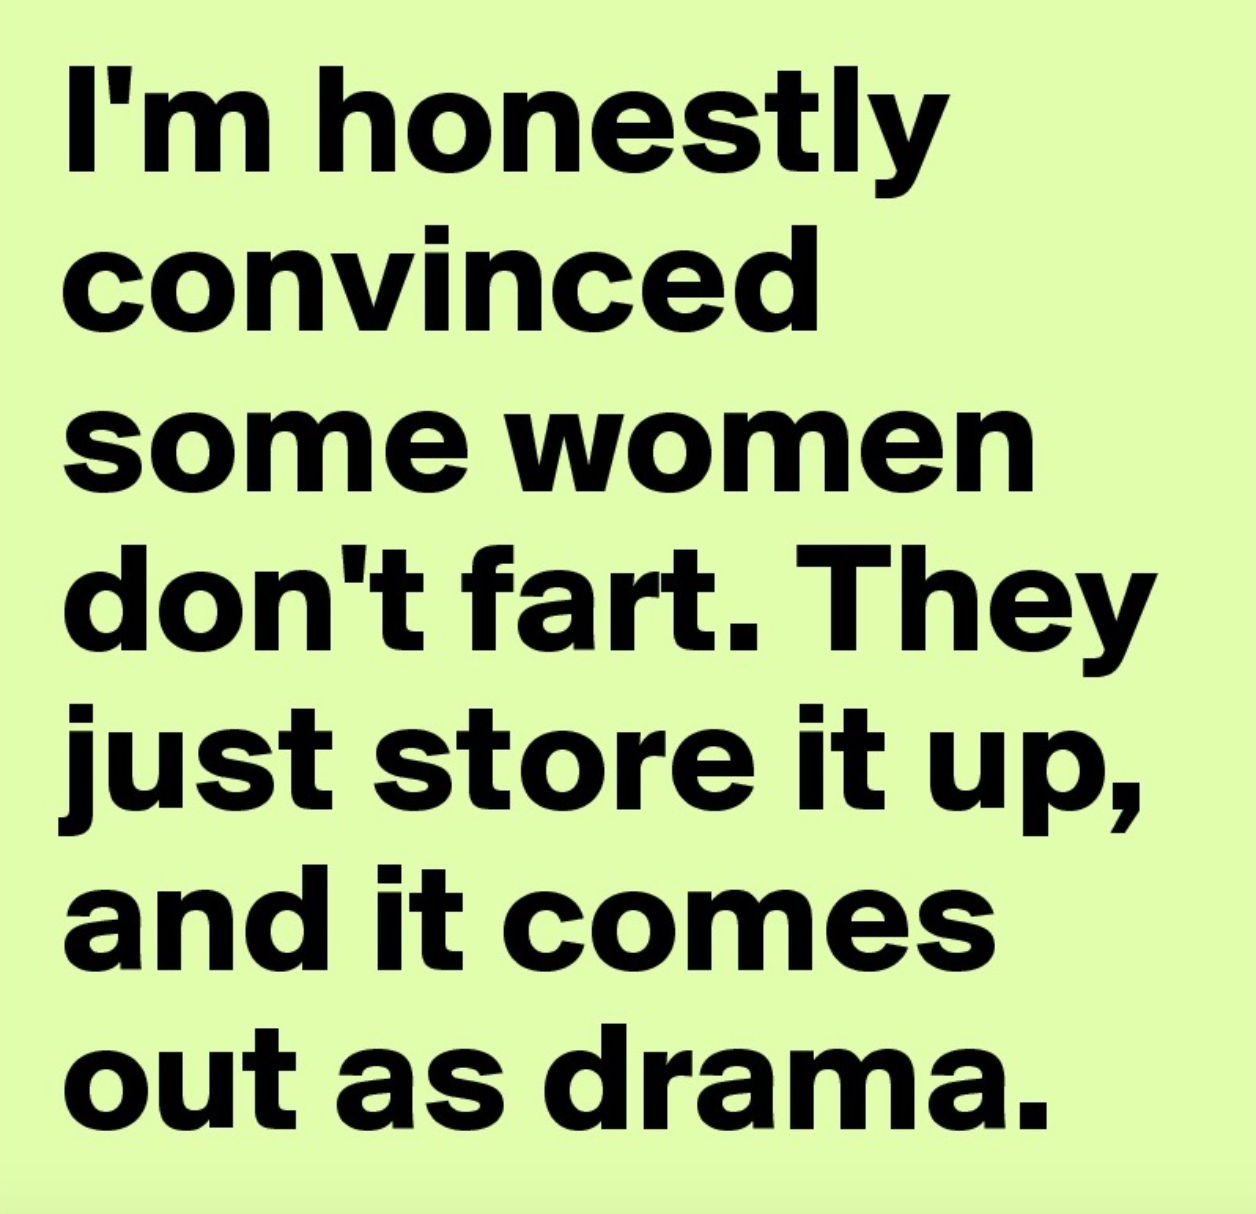 number - I'm honestly convinced some women don't fart. They just store it up, and it comes out as drama.